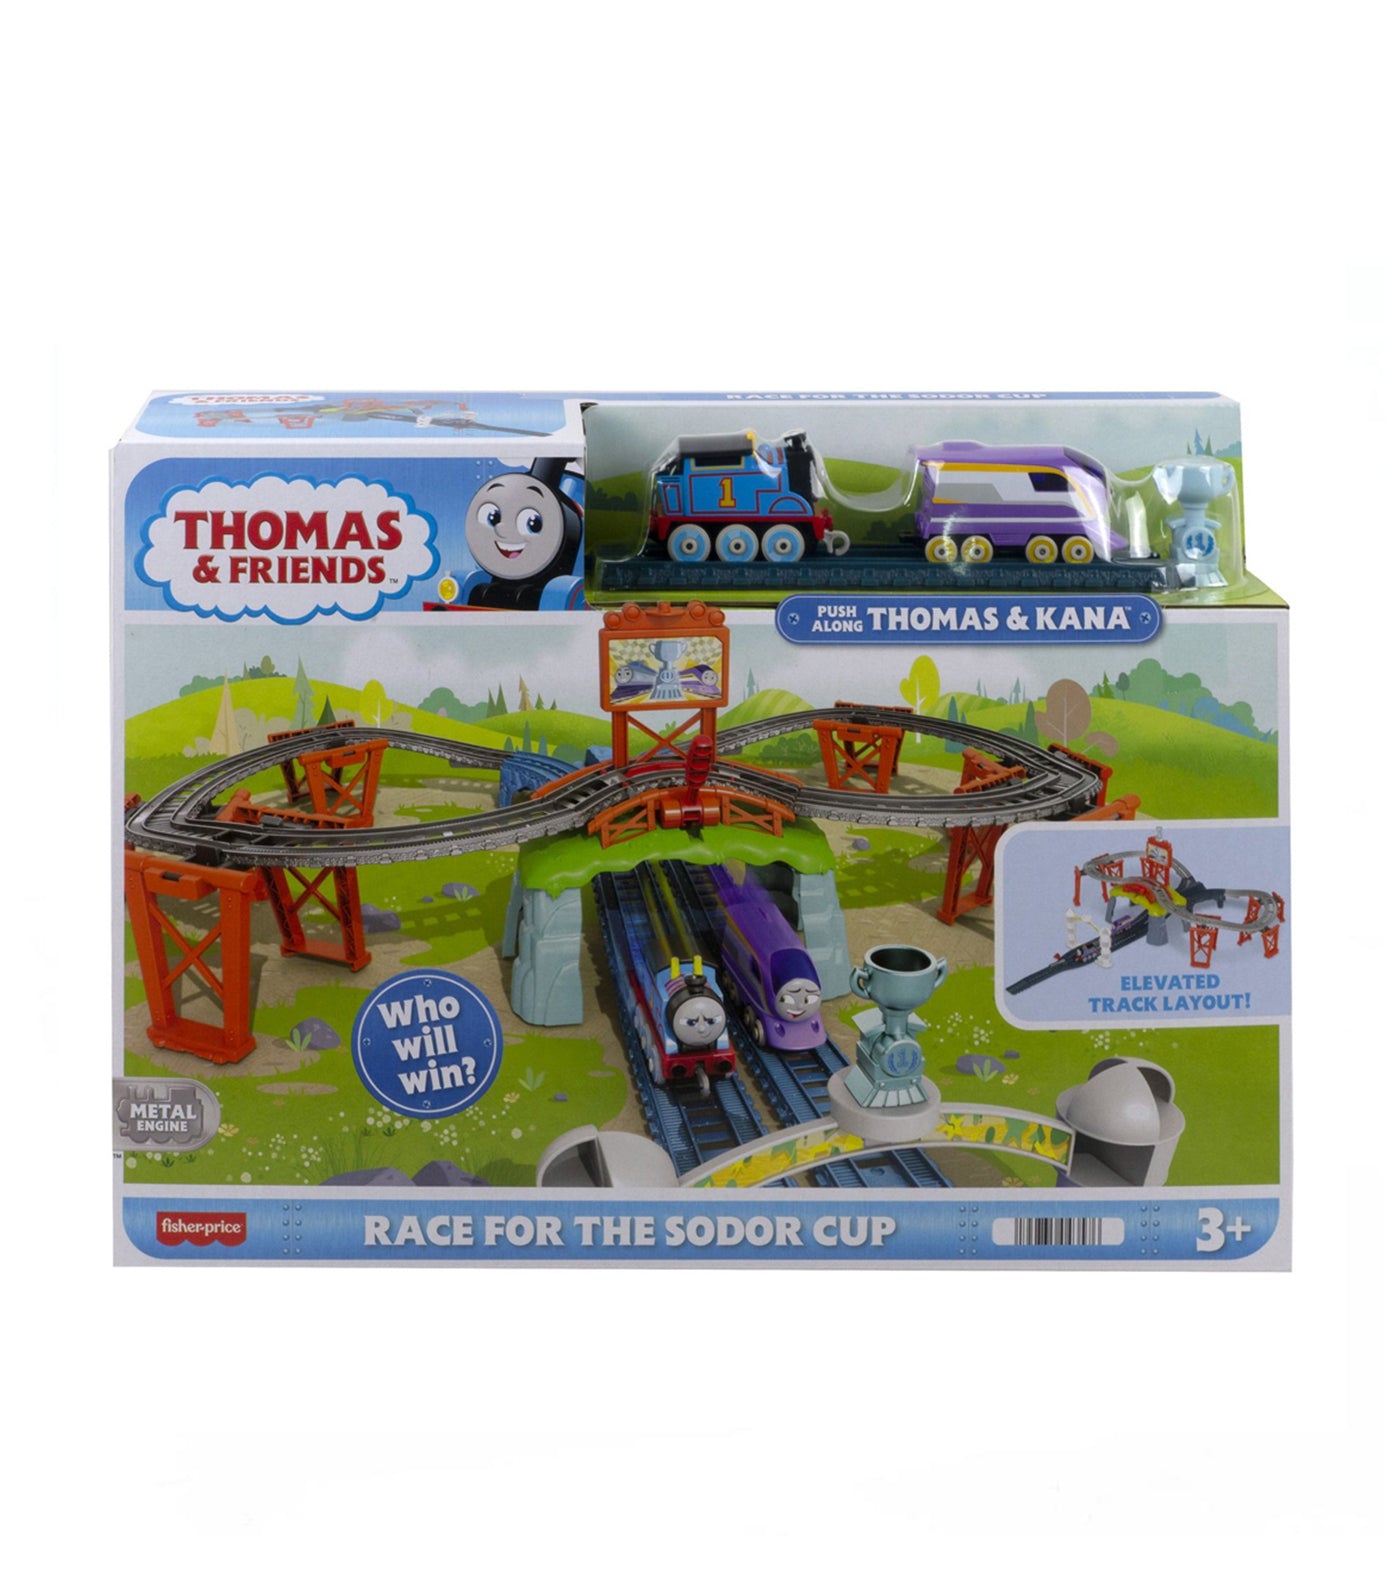 Race for the Sodor Cup Playset